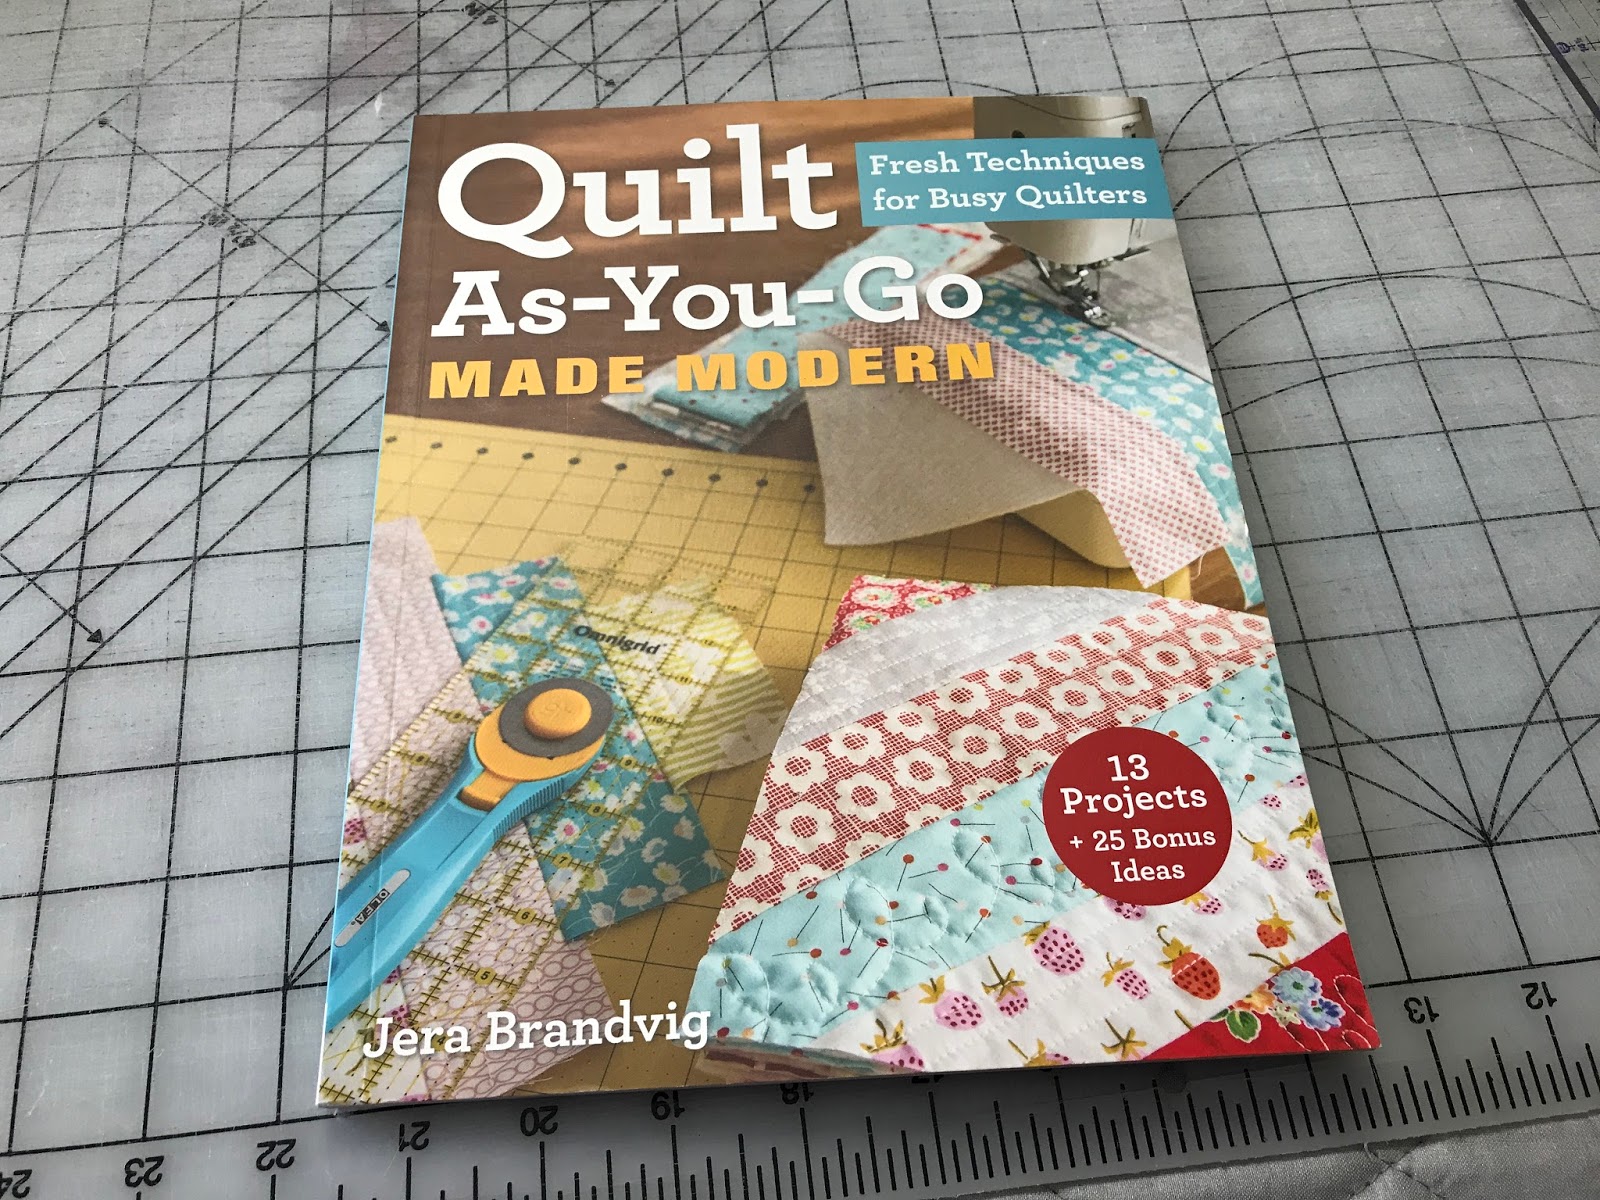 Quilt As-You-Go Made Modern: Fresh Techniques for Busy Quilters by Jera  Brandvig